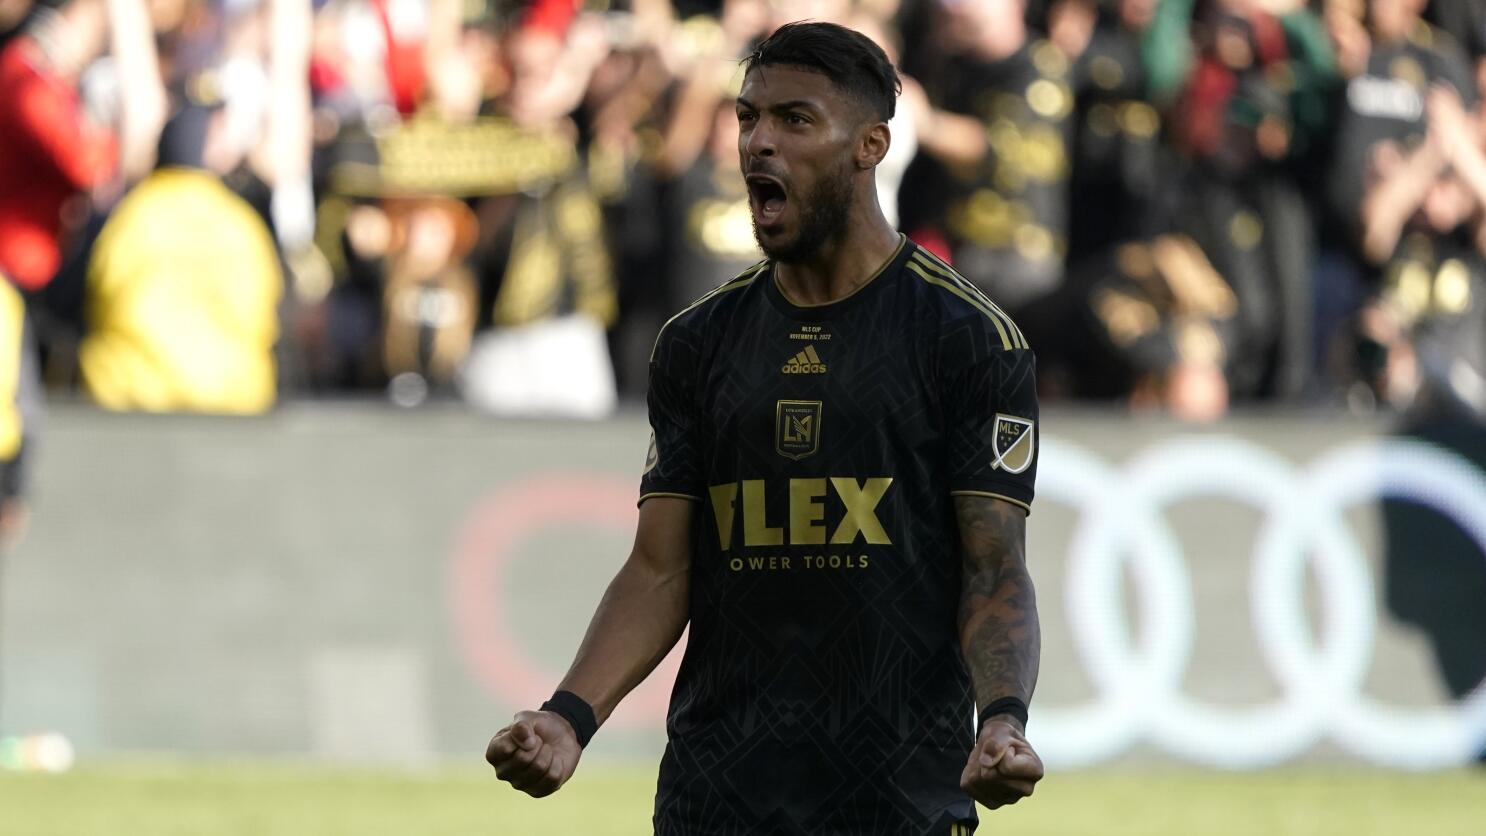 LAFC advances to MLS Cup final with 3-0 win over Austin FC